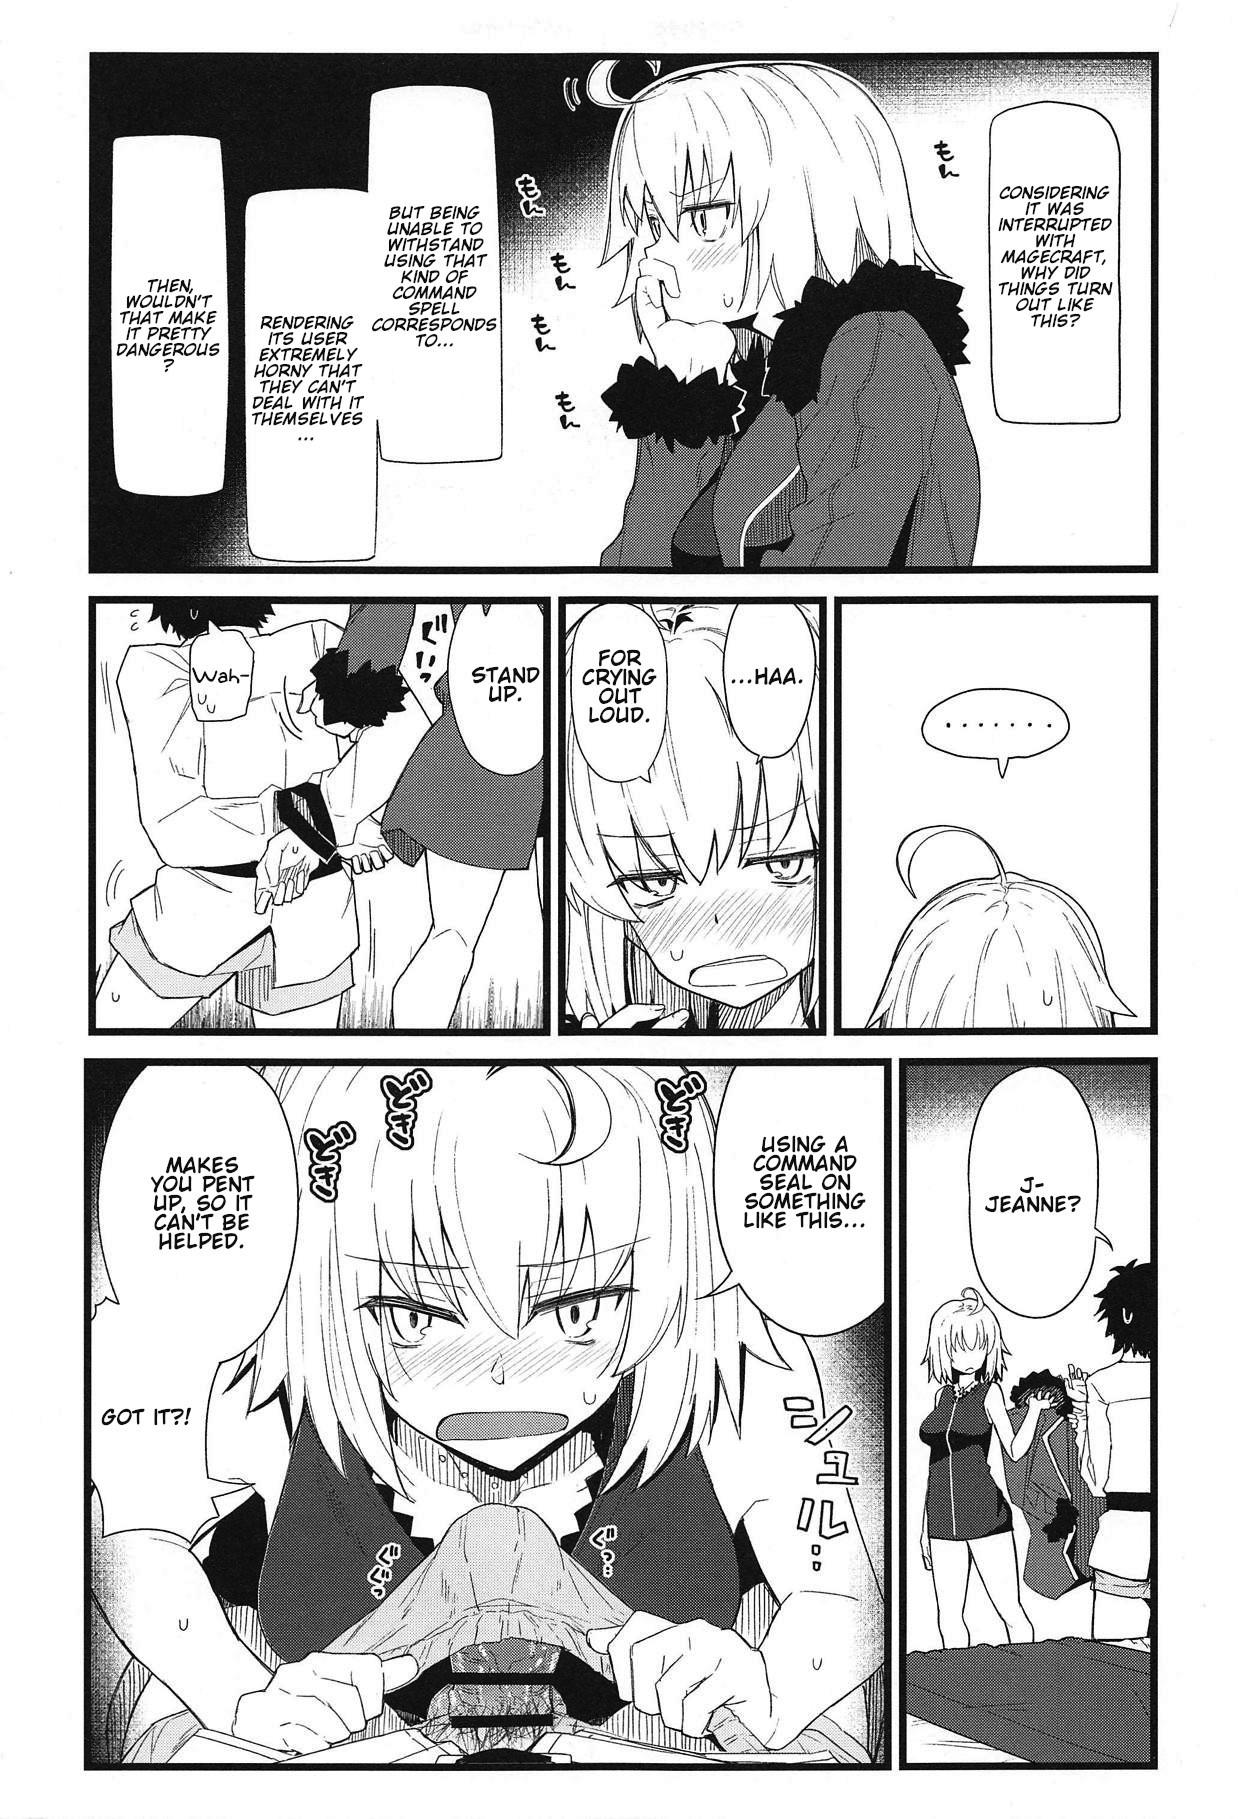 Atm GIRLFriend's 15 - Fate grand order Gozo - Page 4